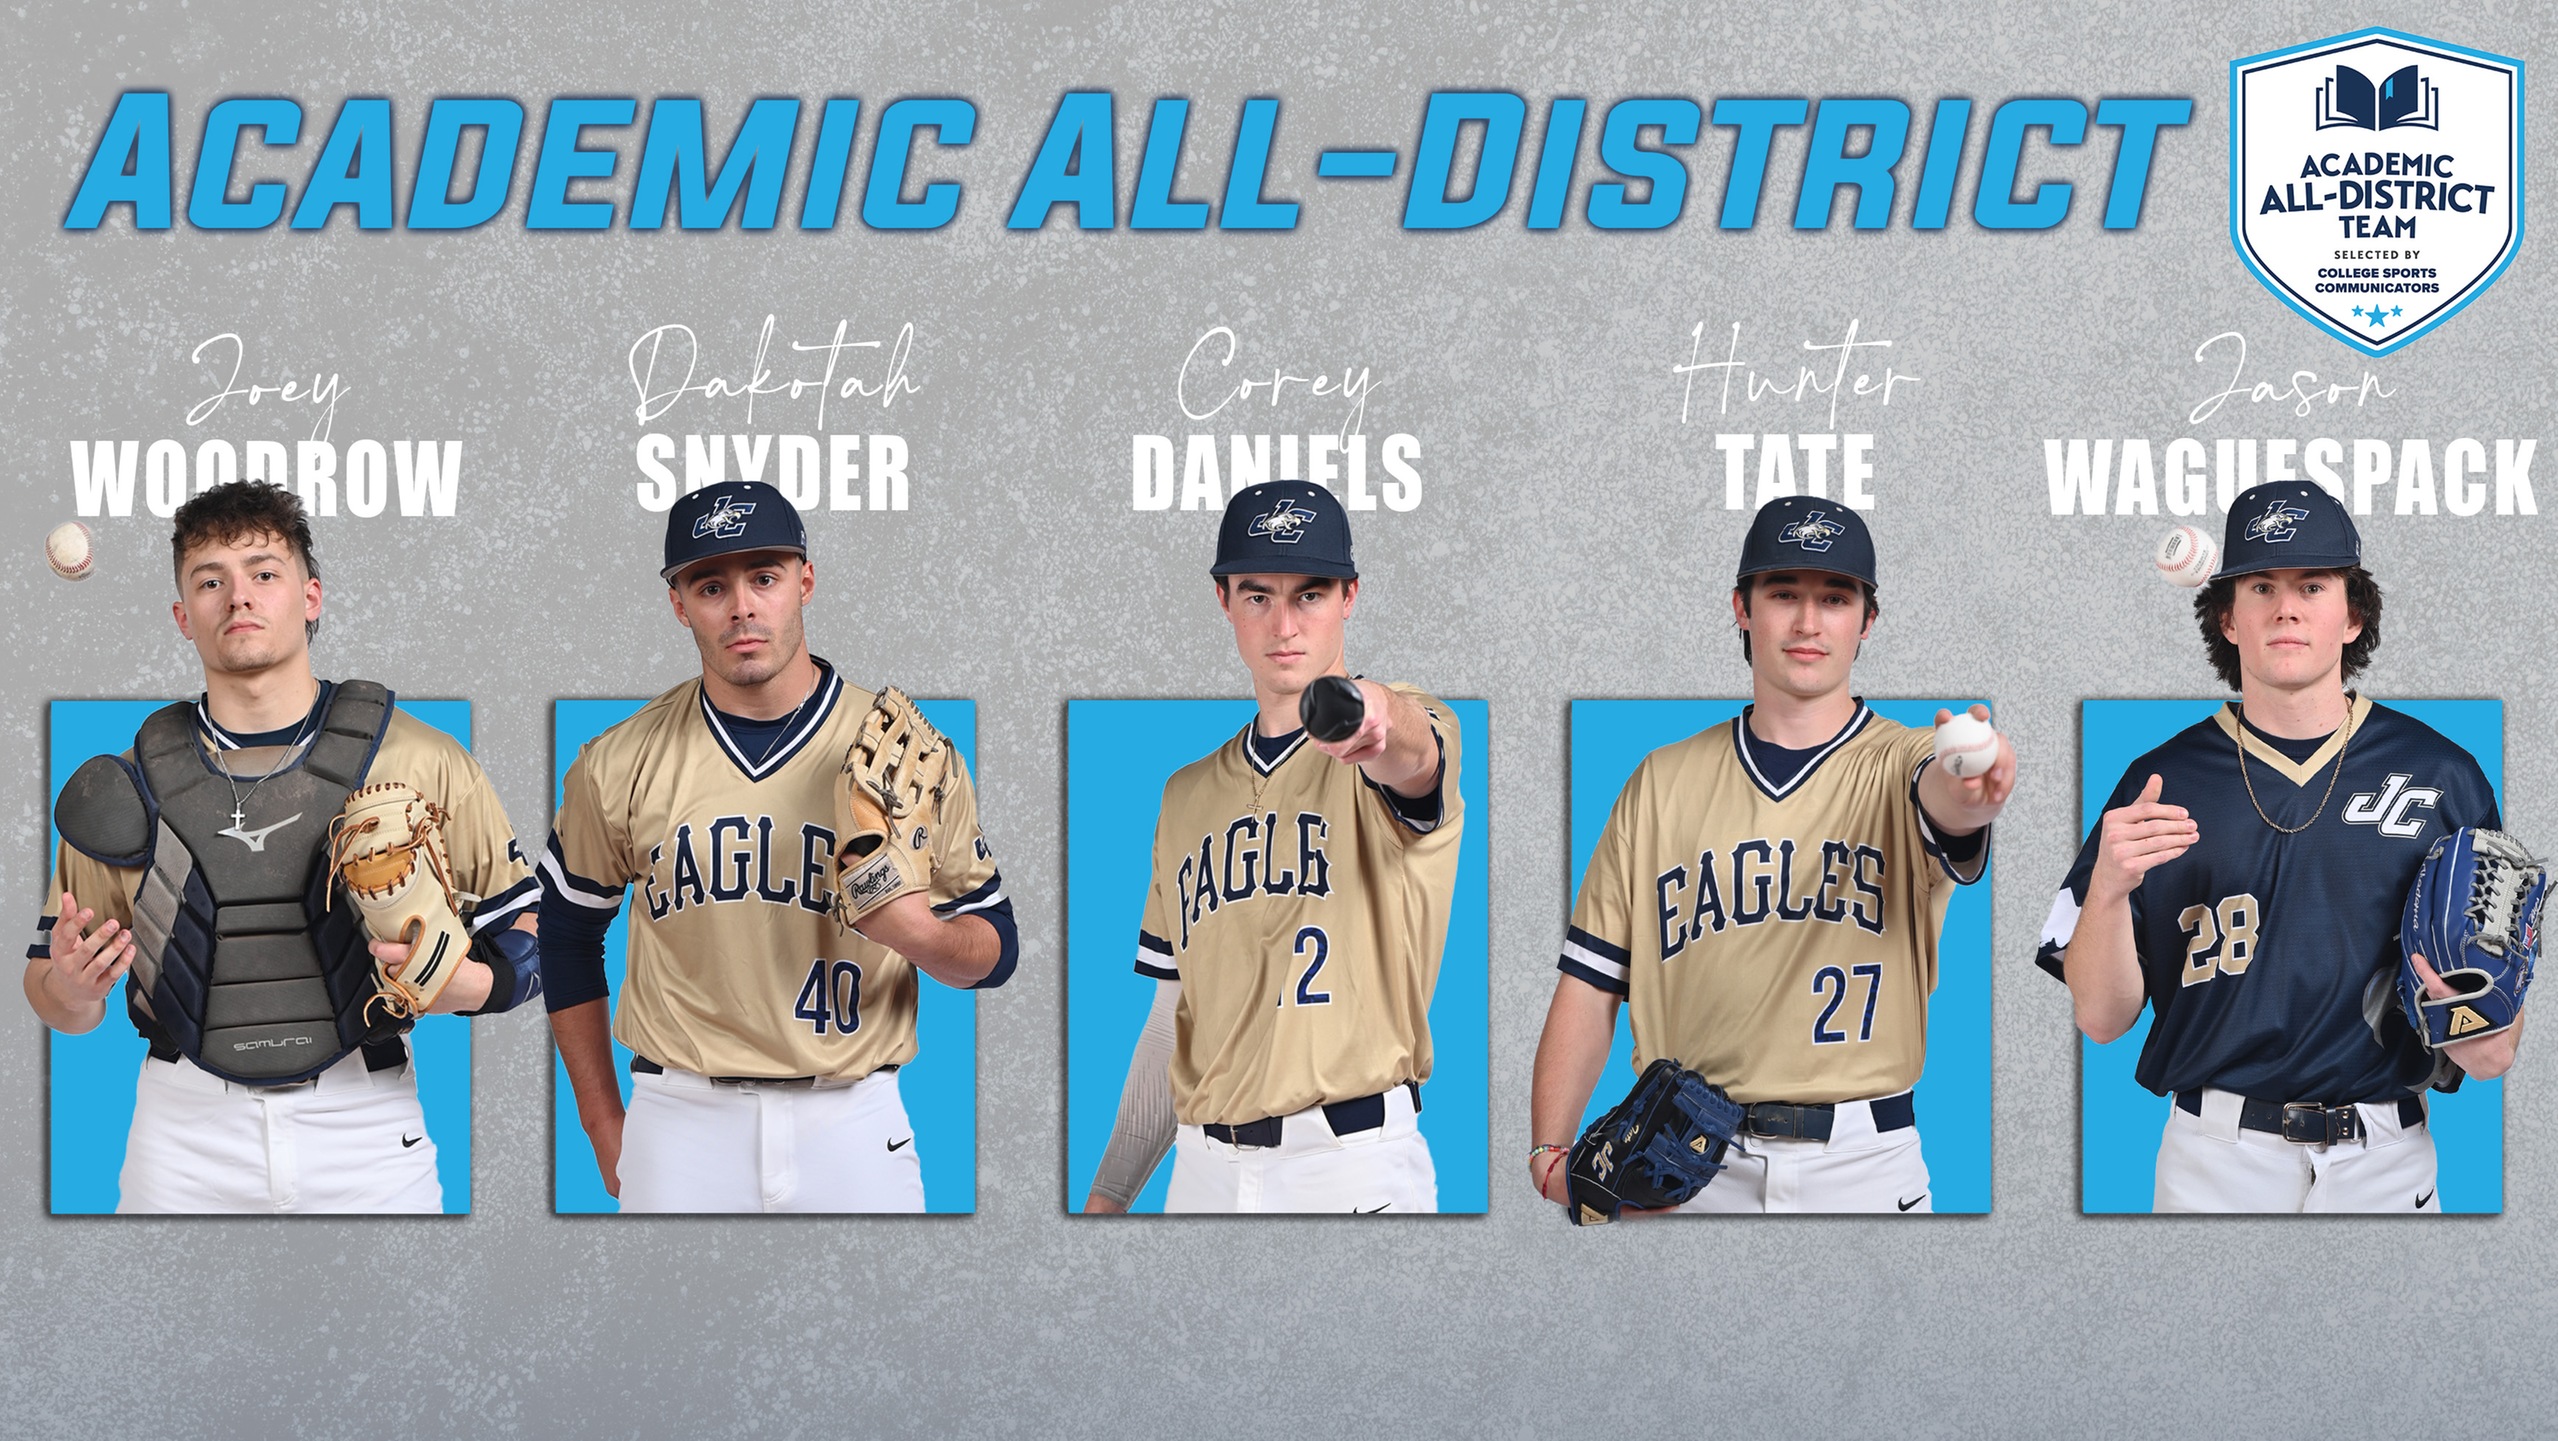 Five Eagles Named to College Sports Communicators Academic All-District® Baseball Team